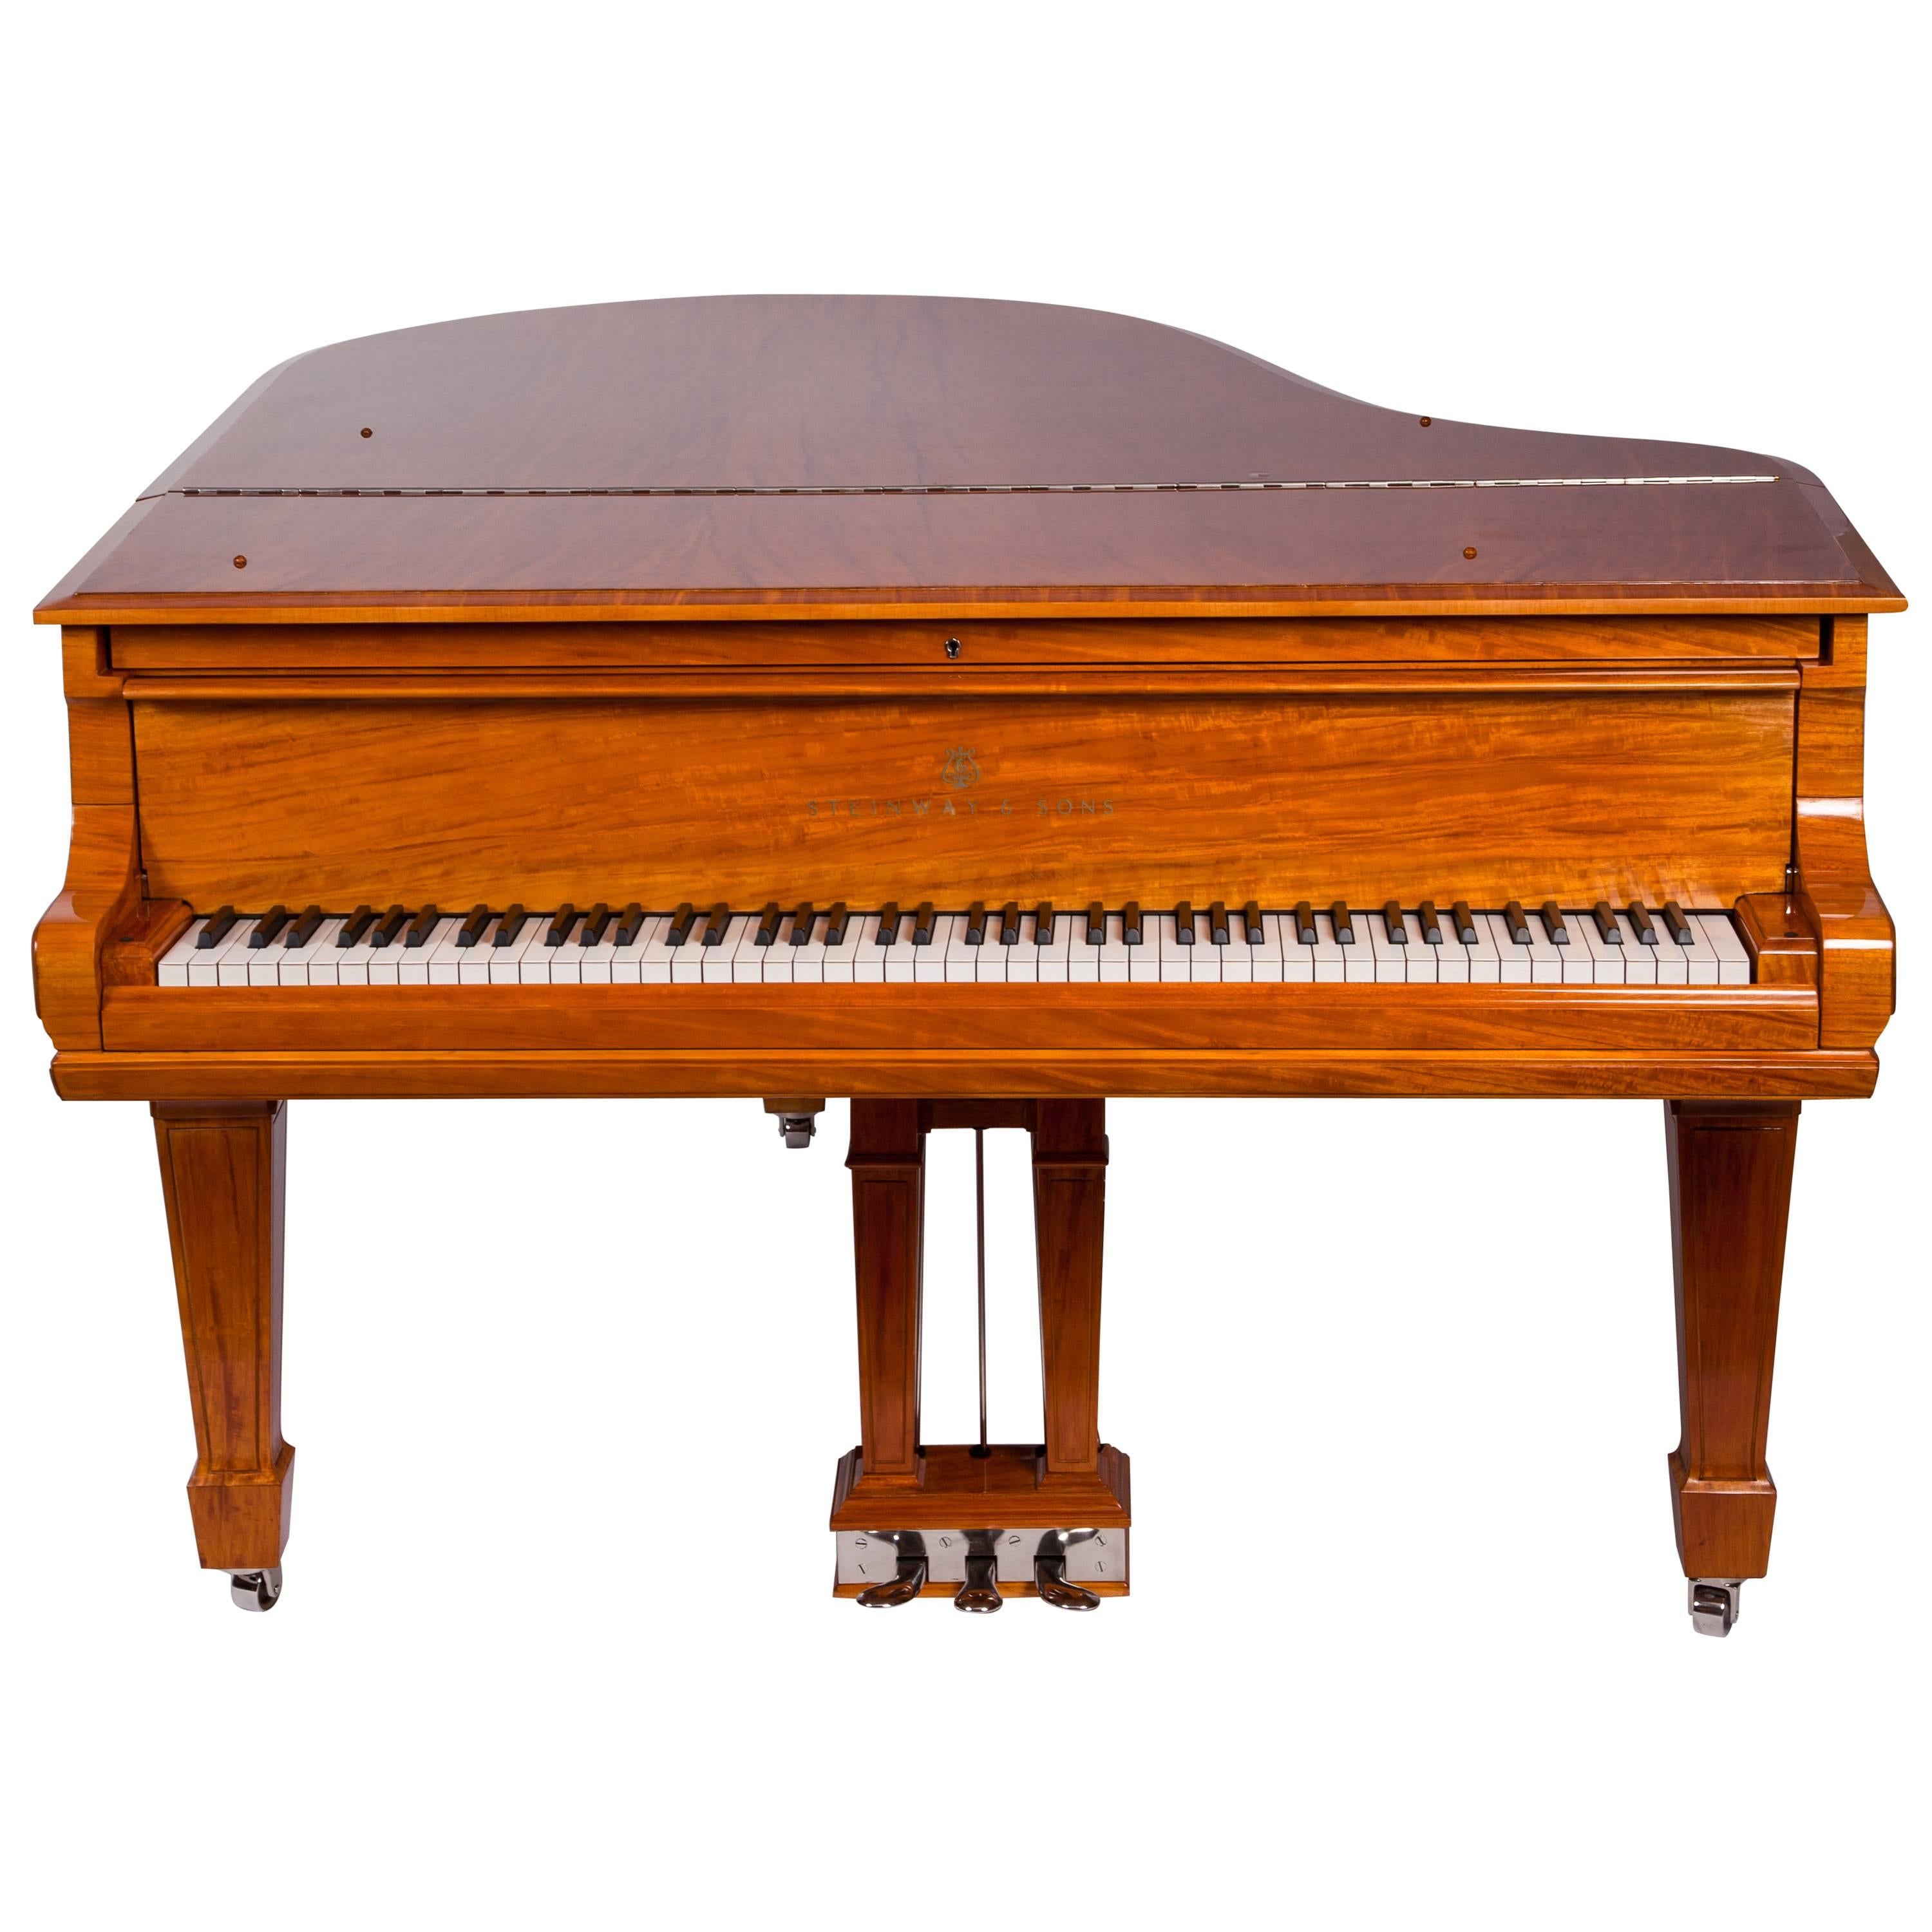 Steinway & Sons L Grand Piano Lemon Wood Handpolished Chrome Details New Acti For Sale